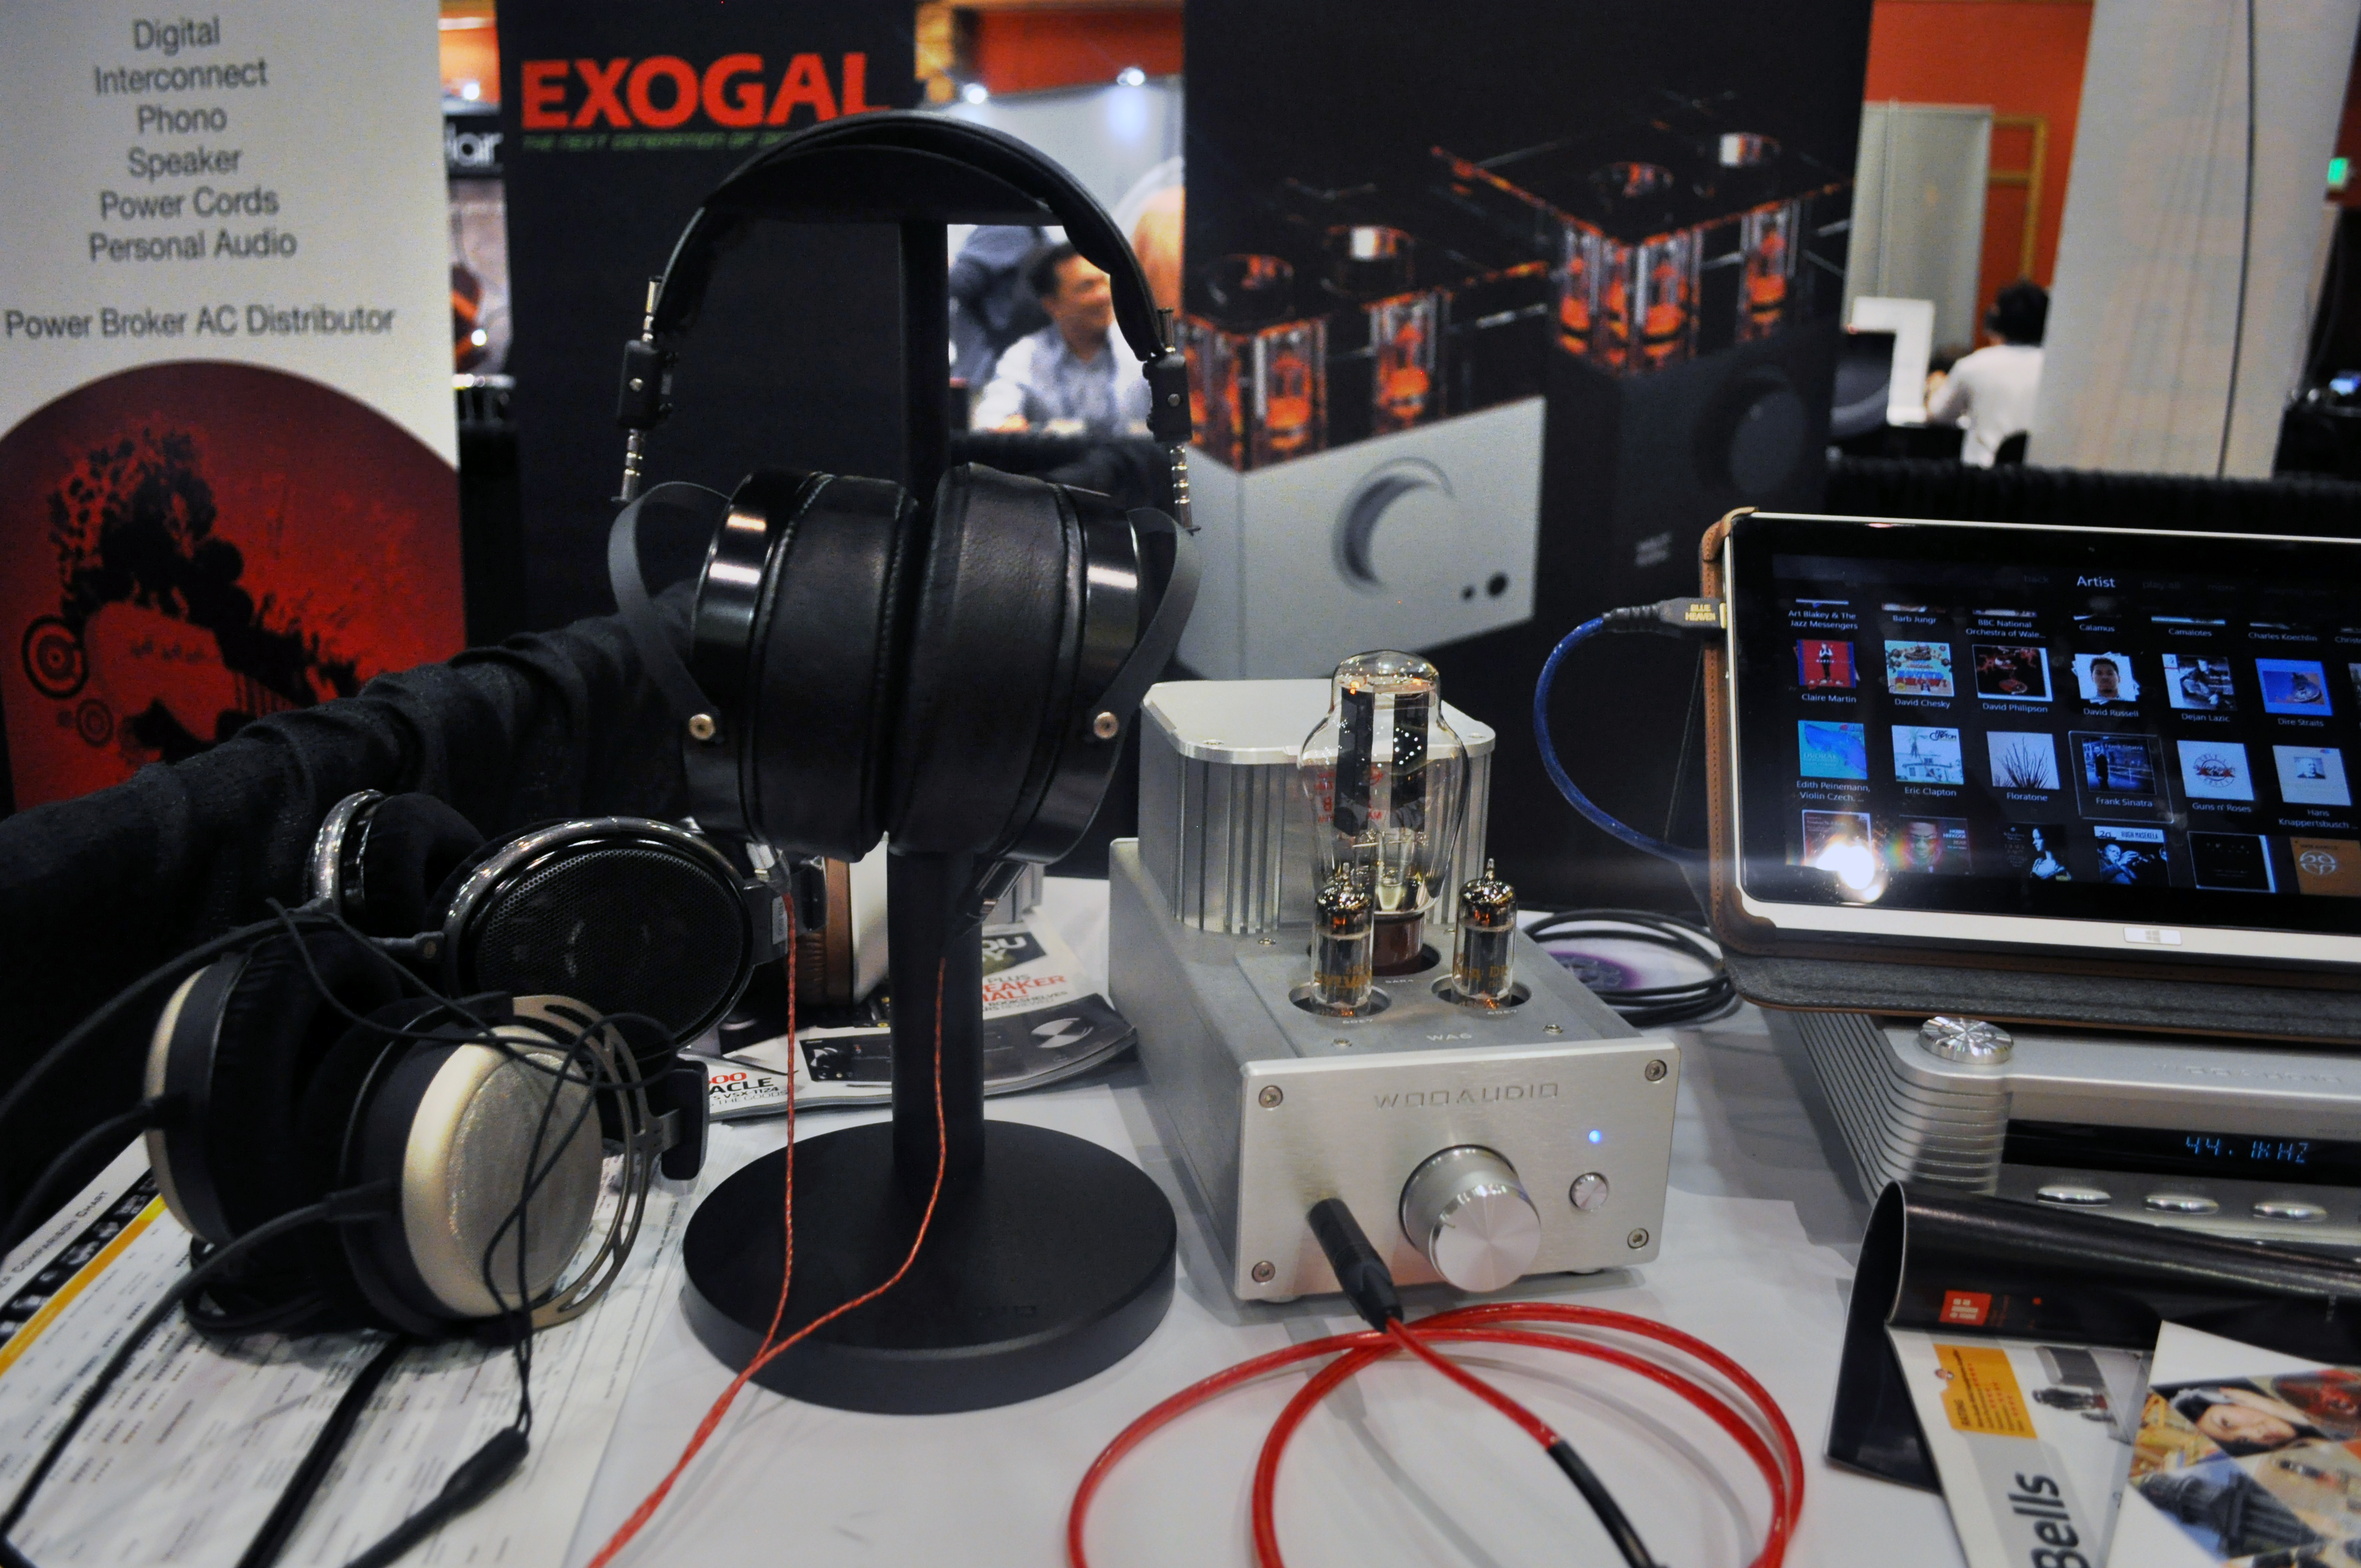 Woo Audio's setup used our interconnects, both the Blue Heaven and Heimdall 2 USB, and the Heimdall 2 Headphone Cable too!